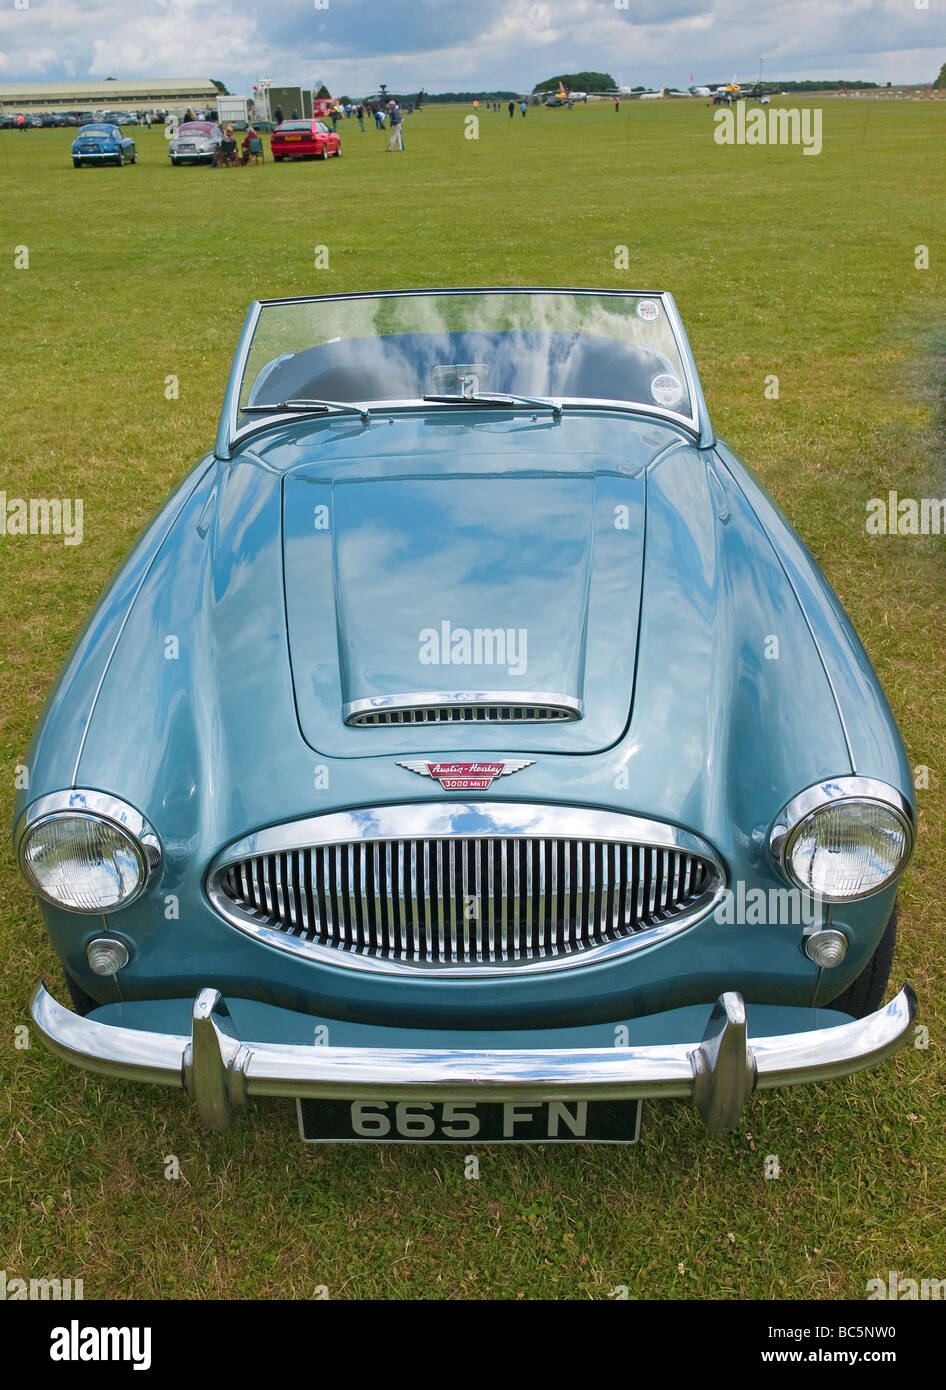 Classic British Austin Healey 3000 MkII open top sports car Banque D'Images